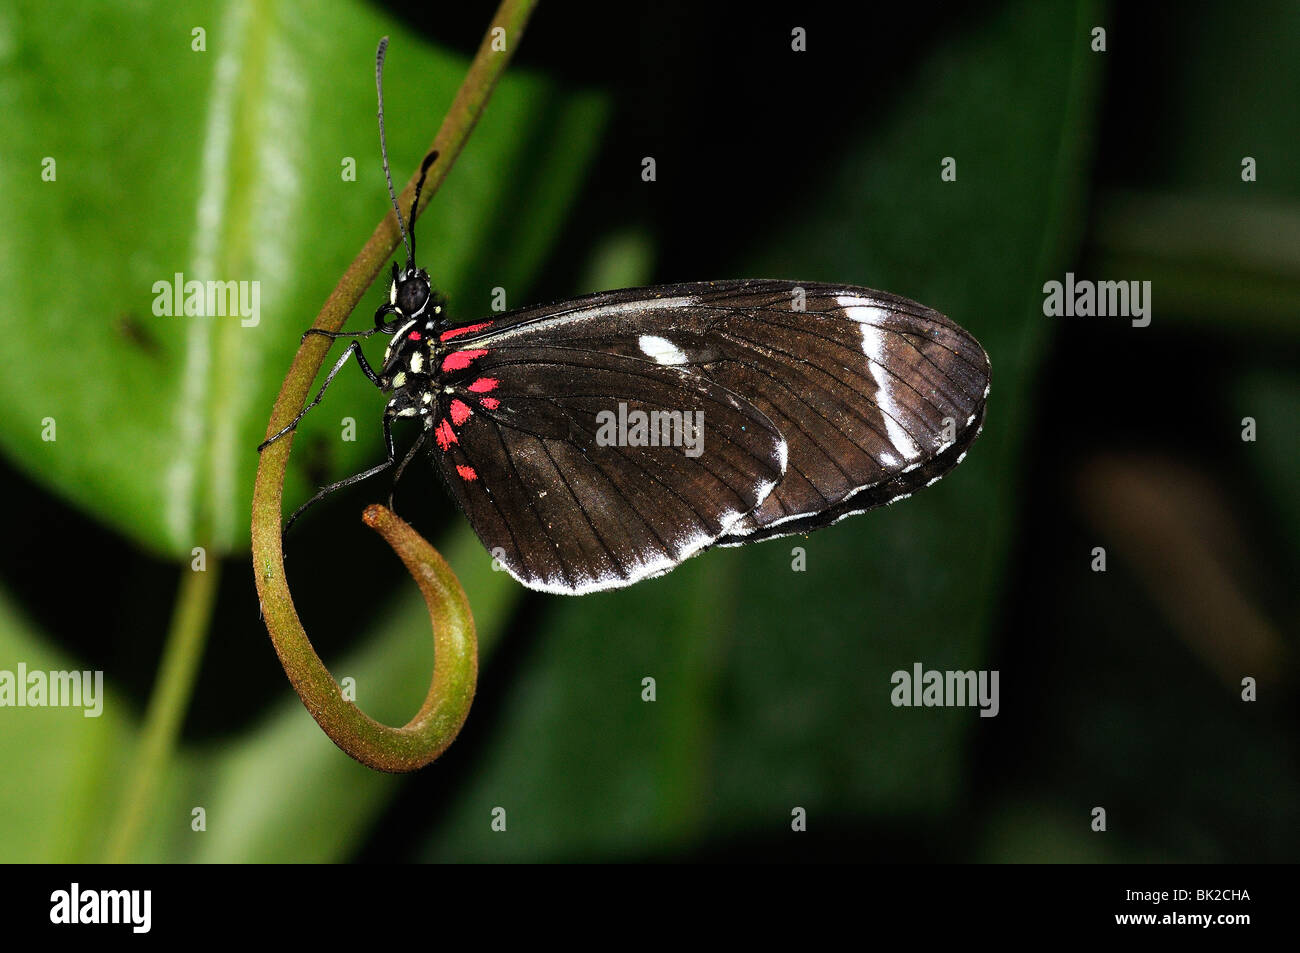 Postman Butterfly (Heliconius melpomene) at rest, native of south america Stock Photo